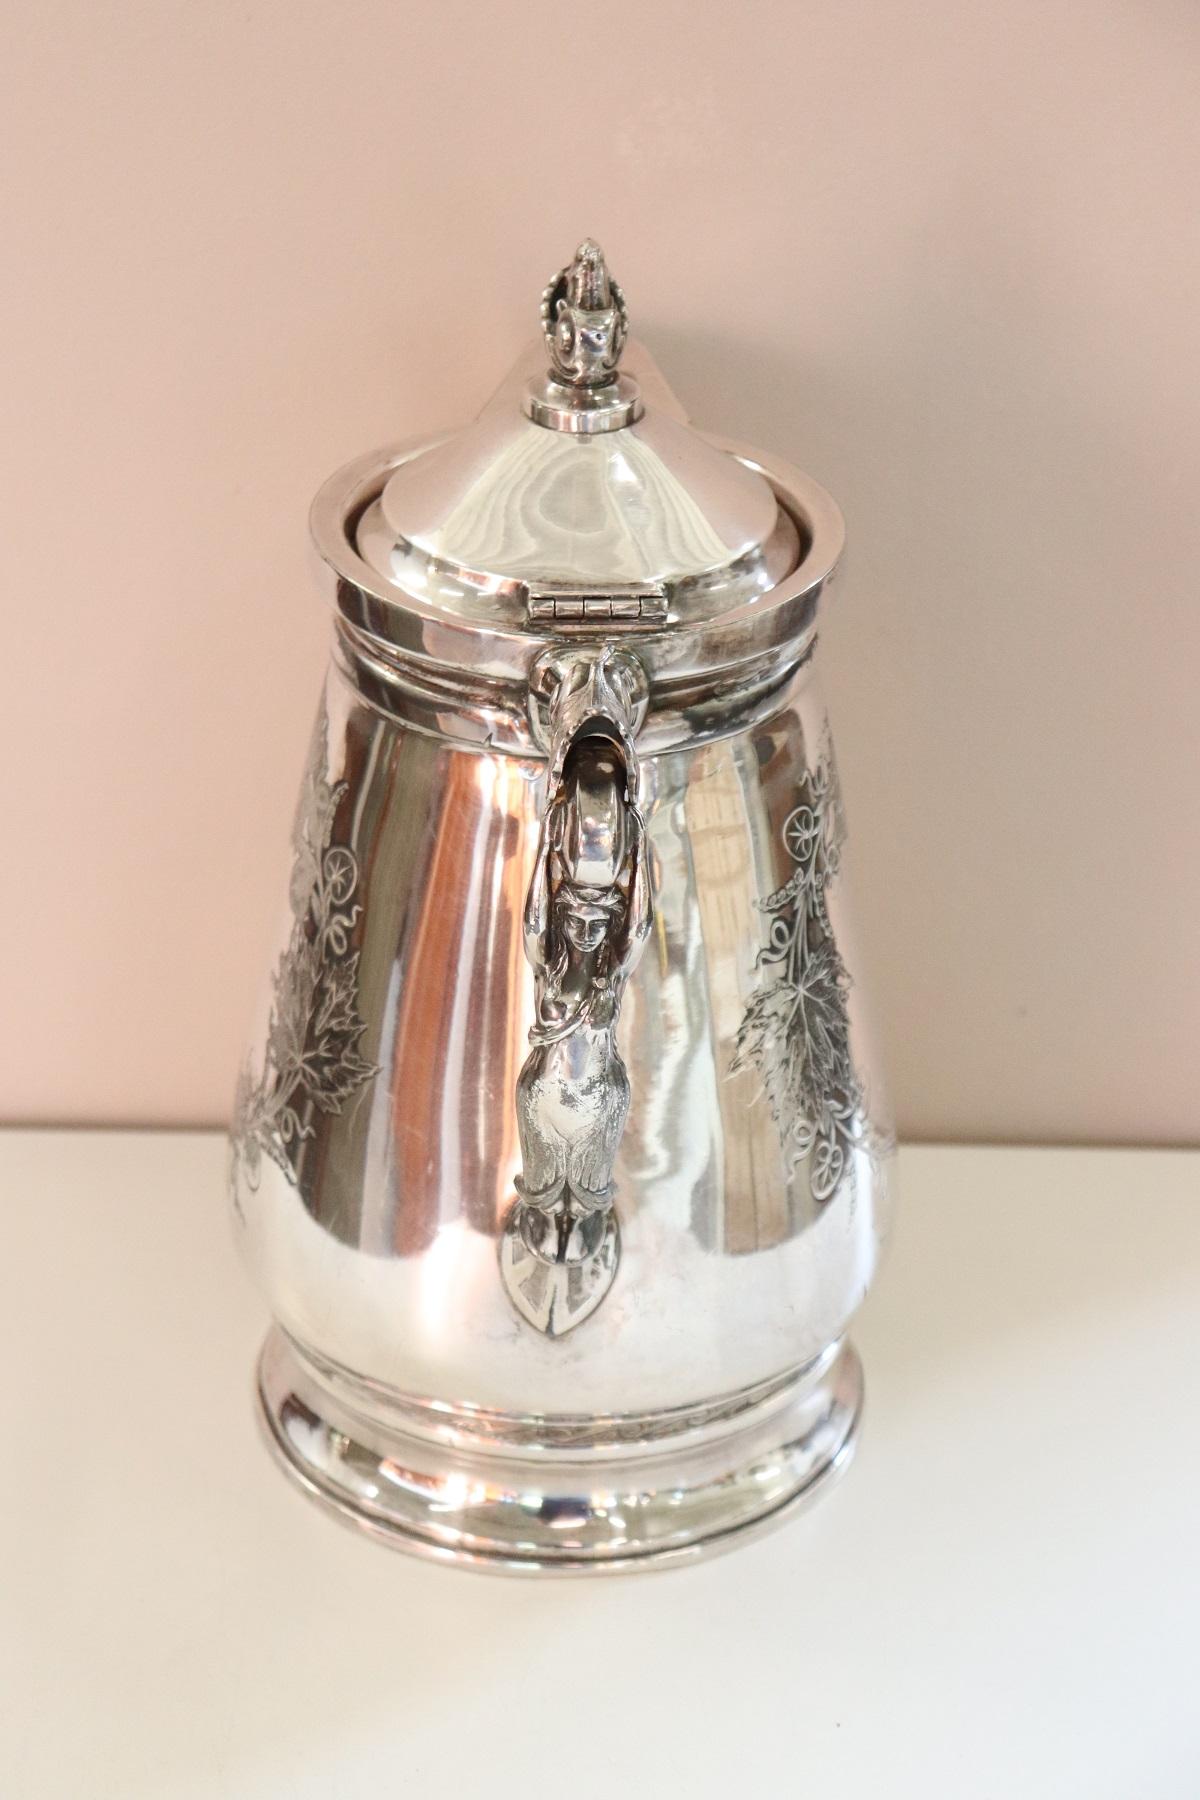 Beautiful American antique silver plate pitcher by Wilcox silver plate Co. Great chiseling work in the metal look carefully at the refined decoration. The handle is shaped like a woman. The body of the pot was engraved with various floral motifs. on